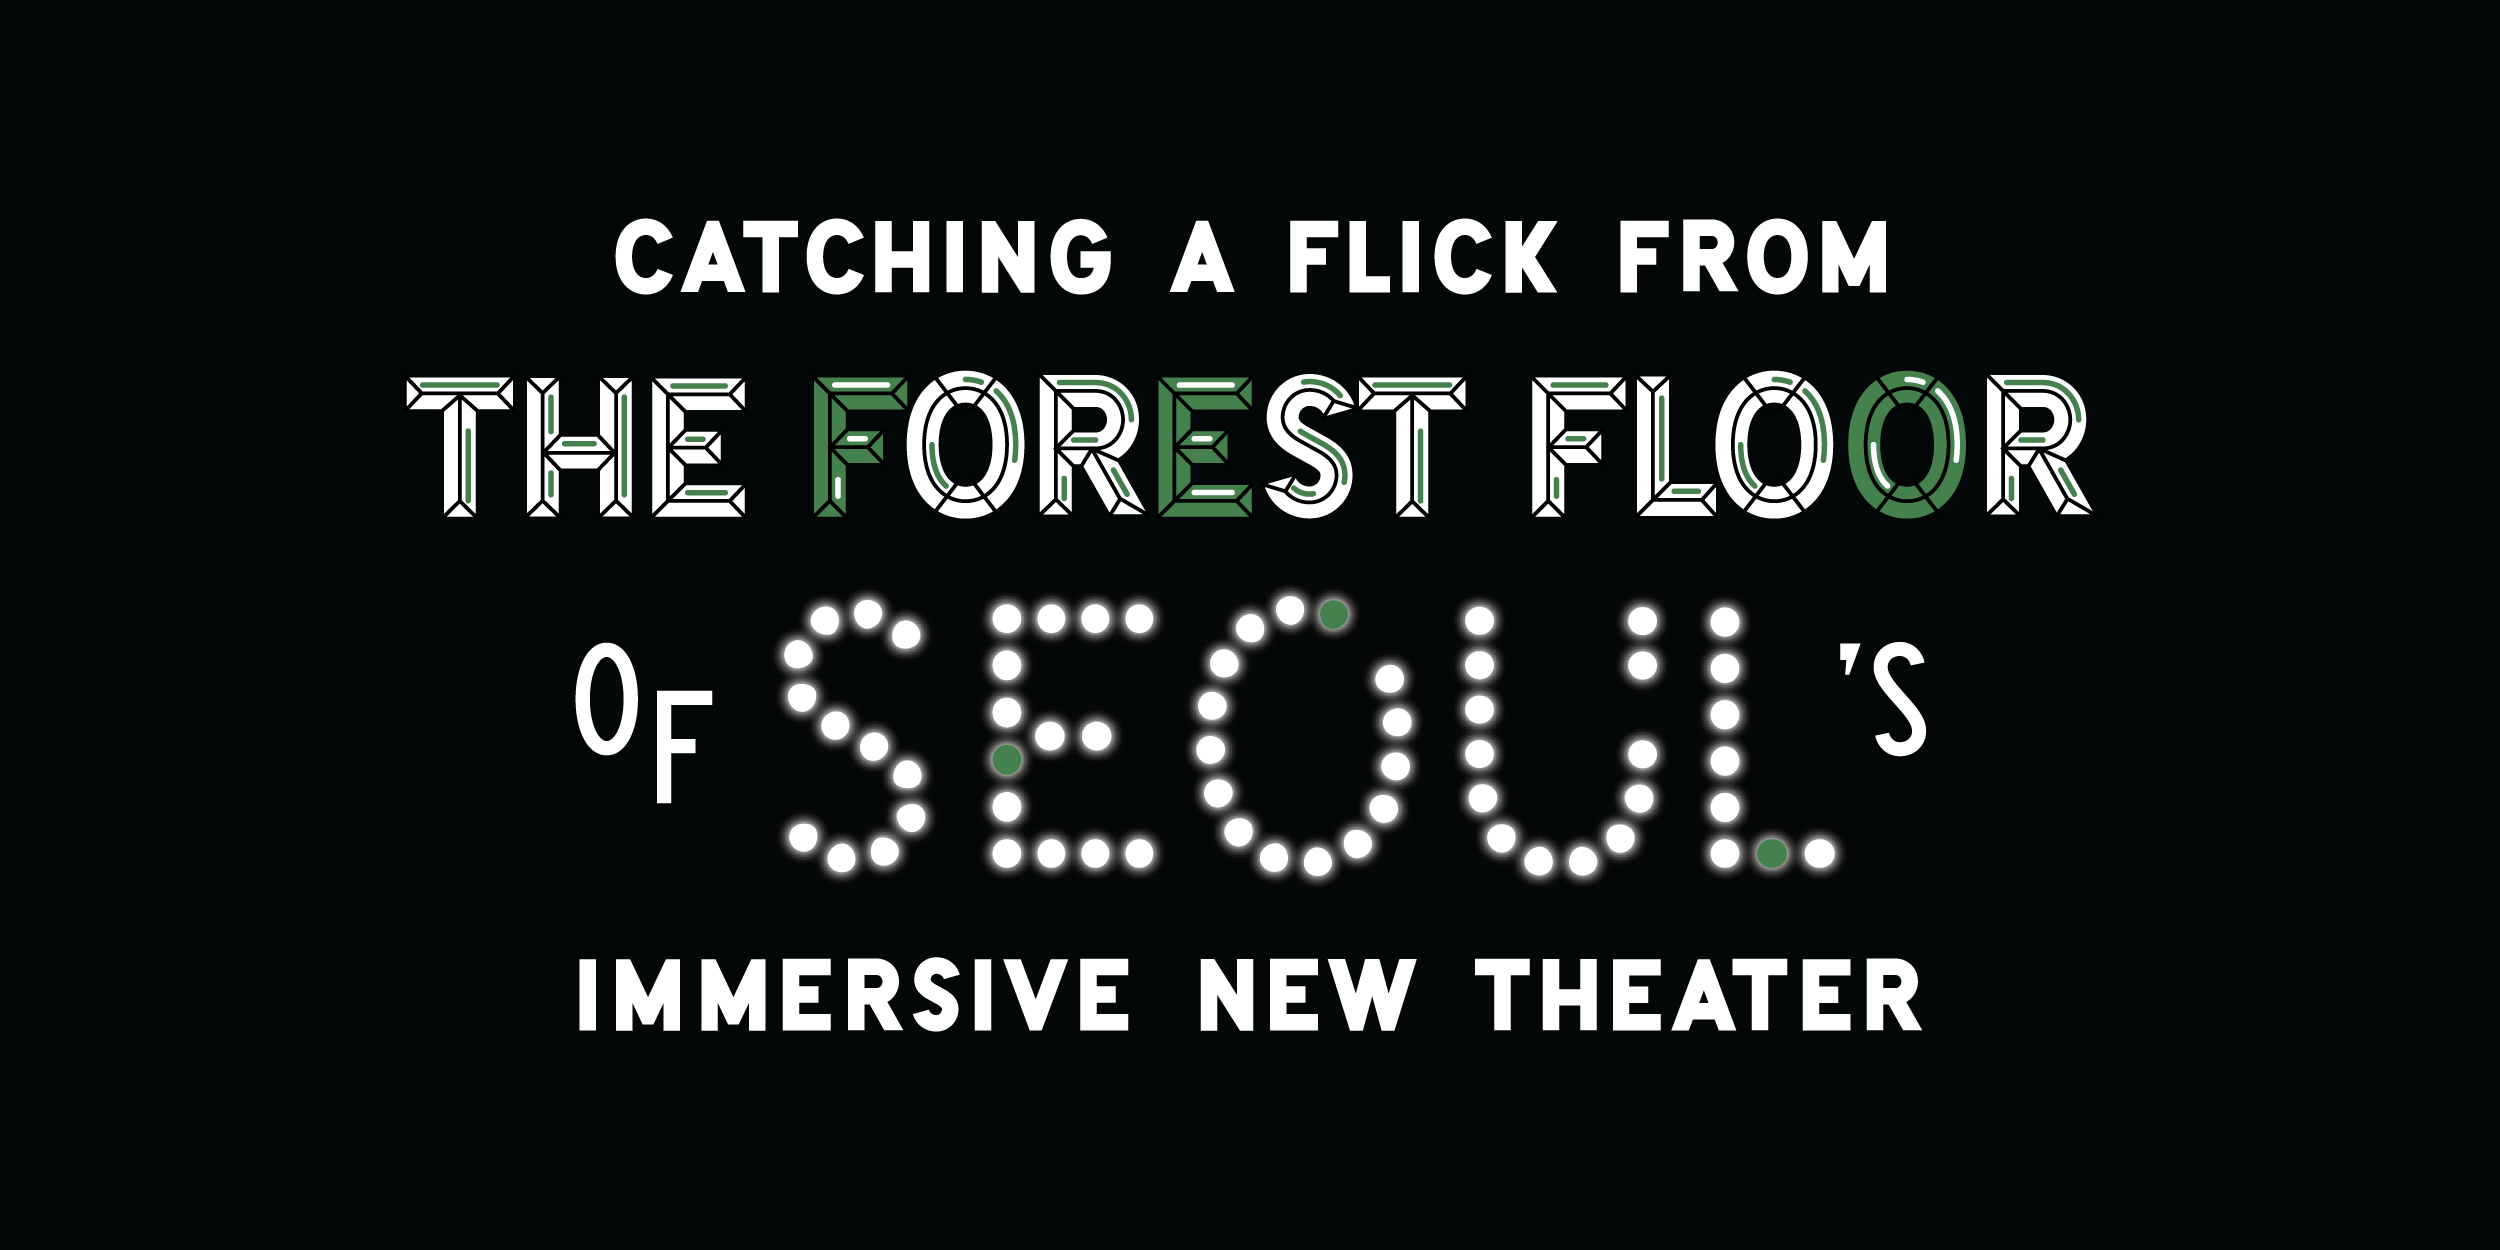 "Catching a Flick from The Forest Floor of Seoul's Immersive New Theater" custom lettering 